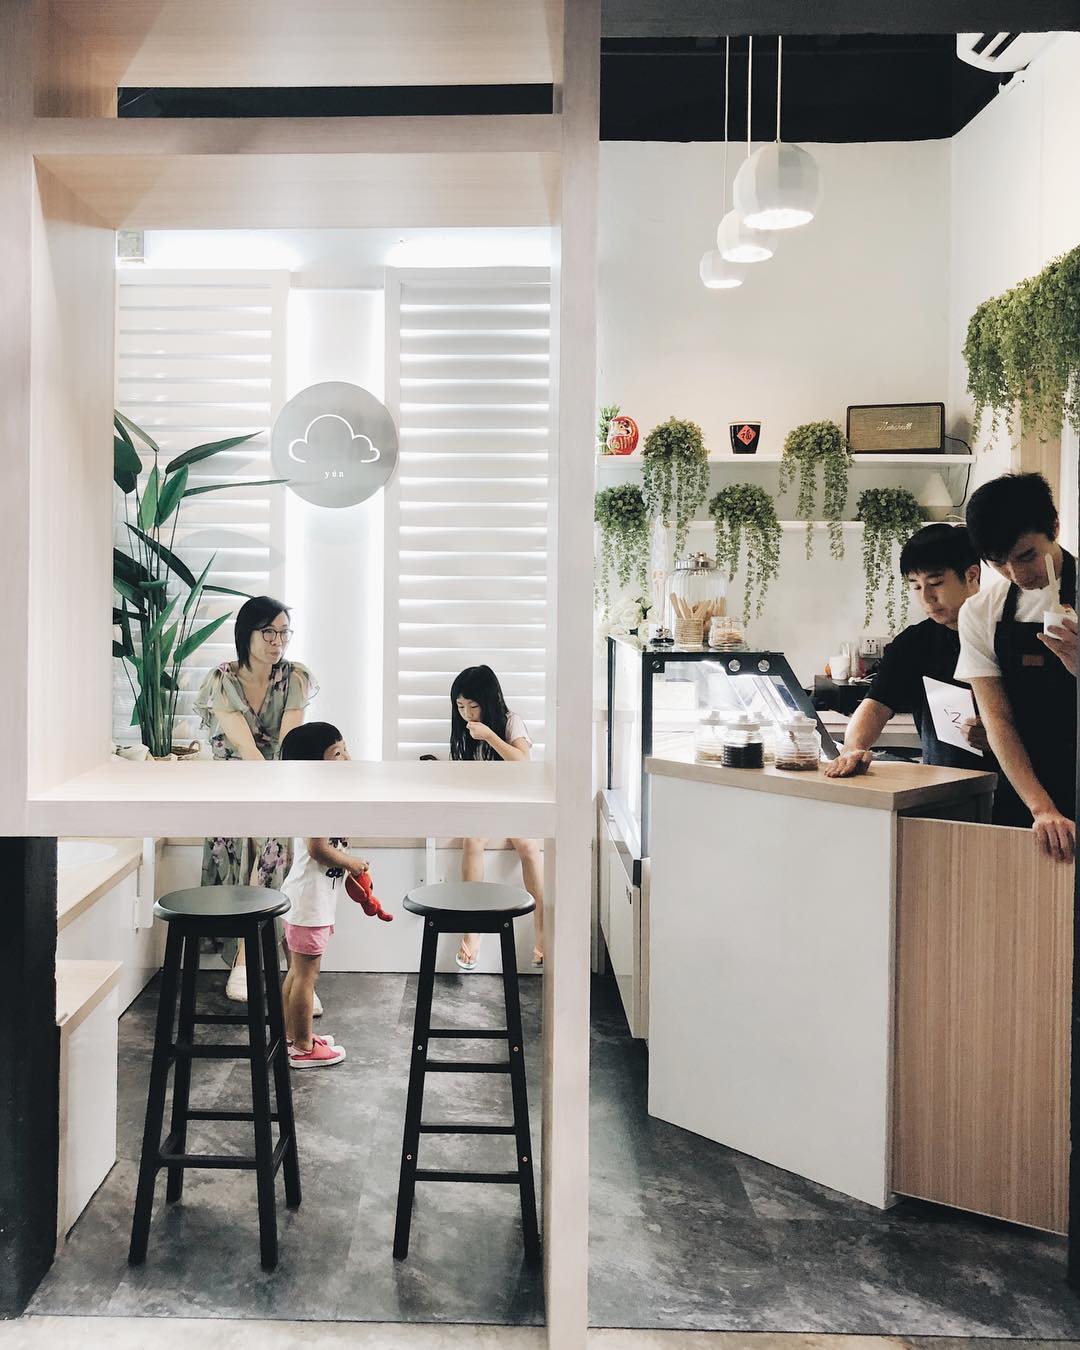 Penang Cafes - Chapel Street Cafe, Belle and Cream, and Yún